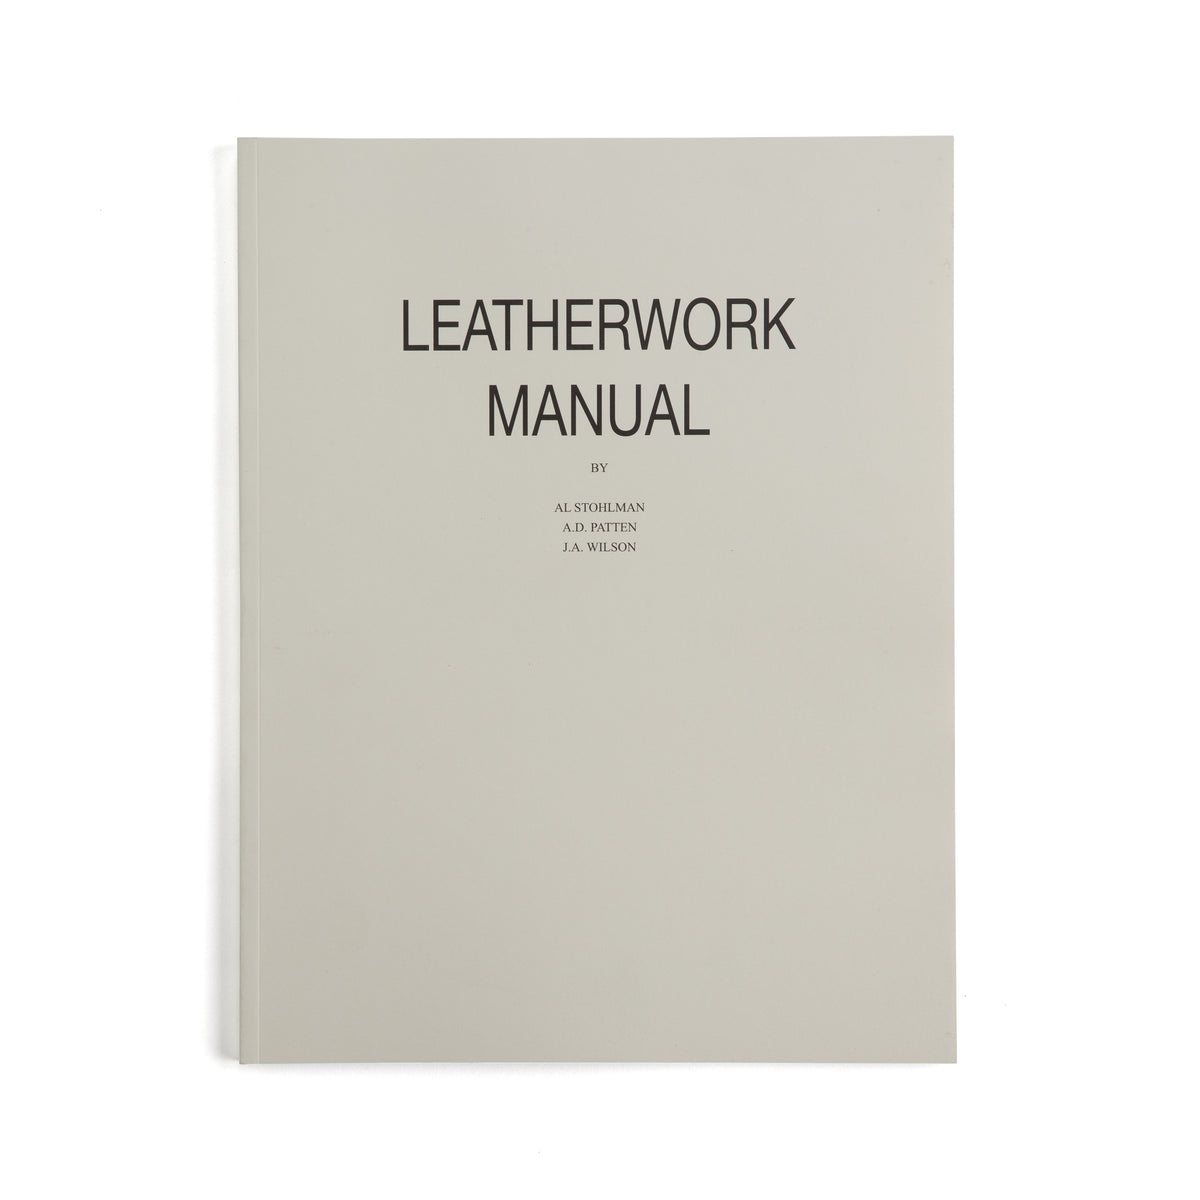 A Beginner's Guide to Leatherwork